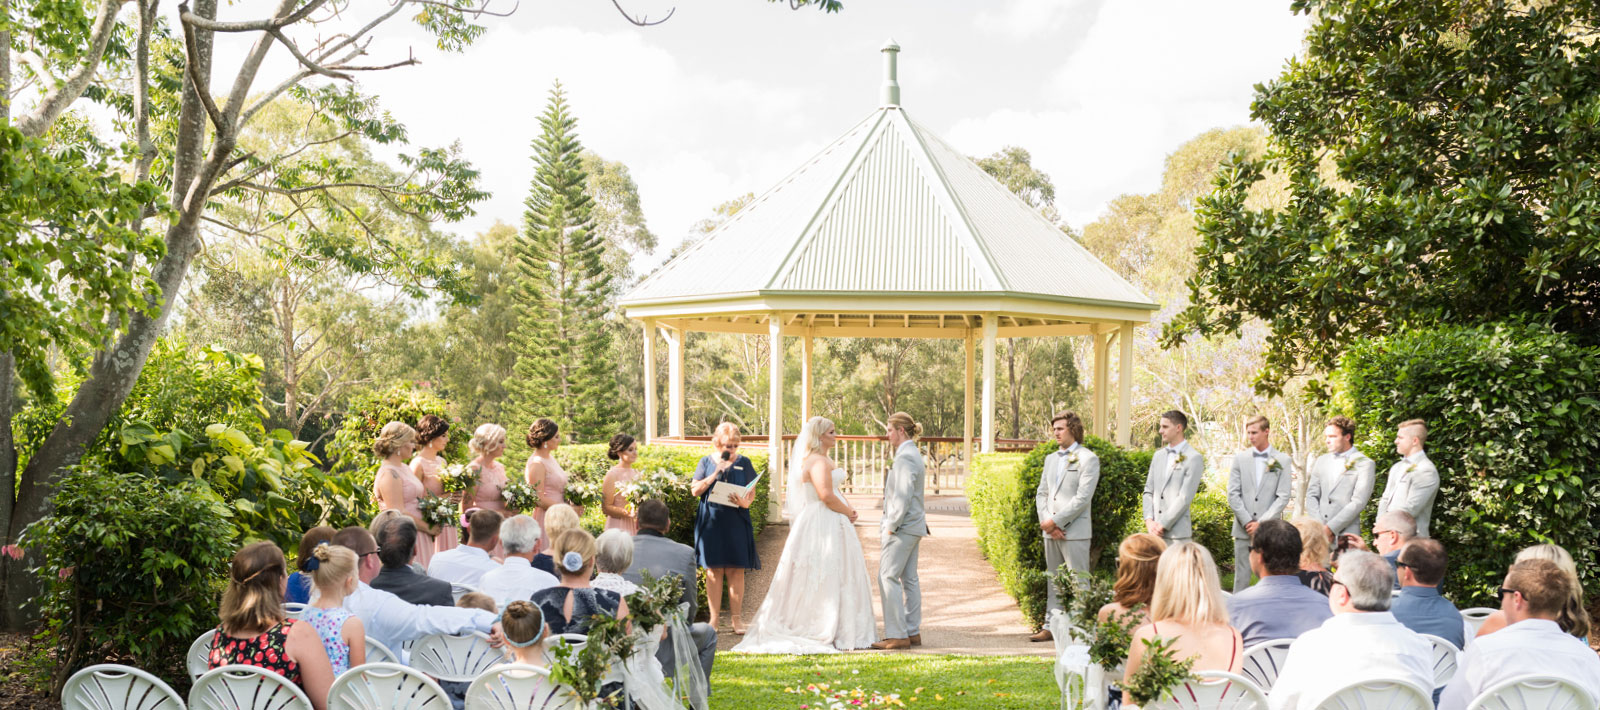 Fairymead House - the venue: Weddings and private functions – Discover  Bundaberg